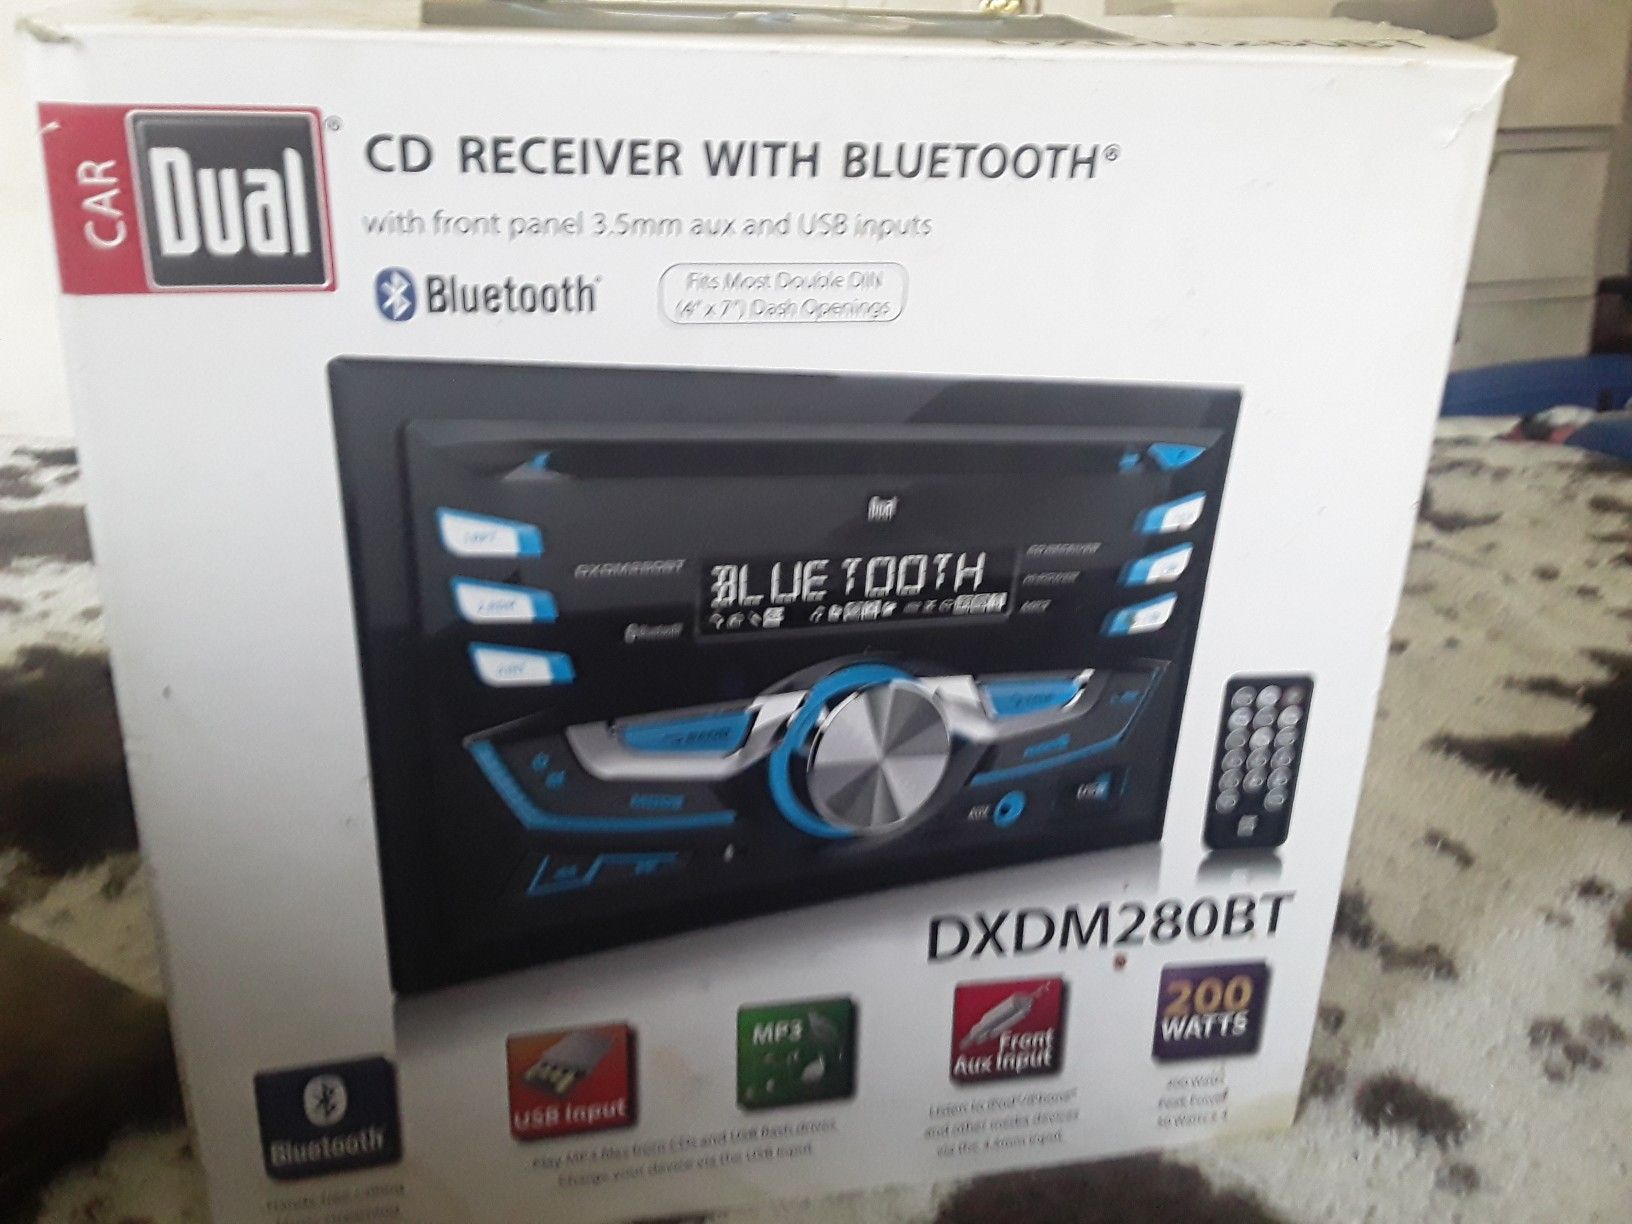 CD receiver with bluetooth